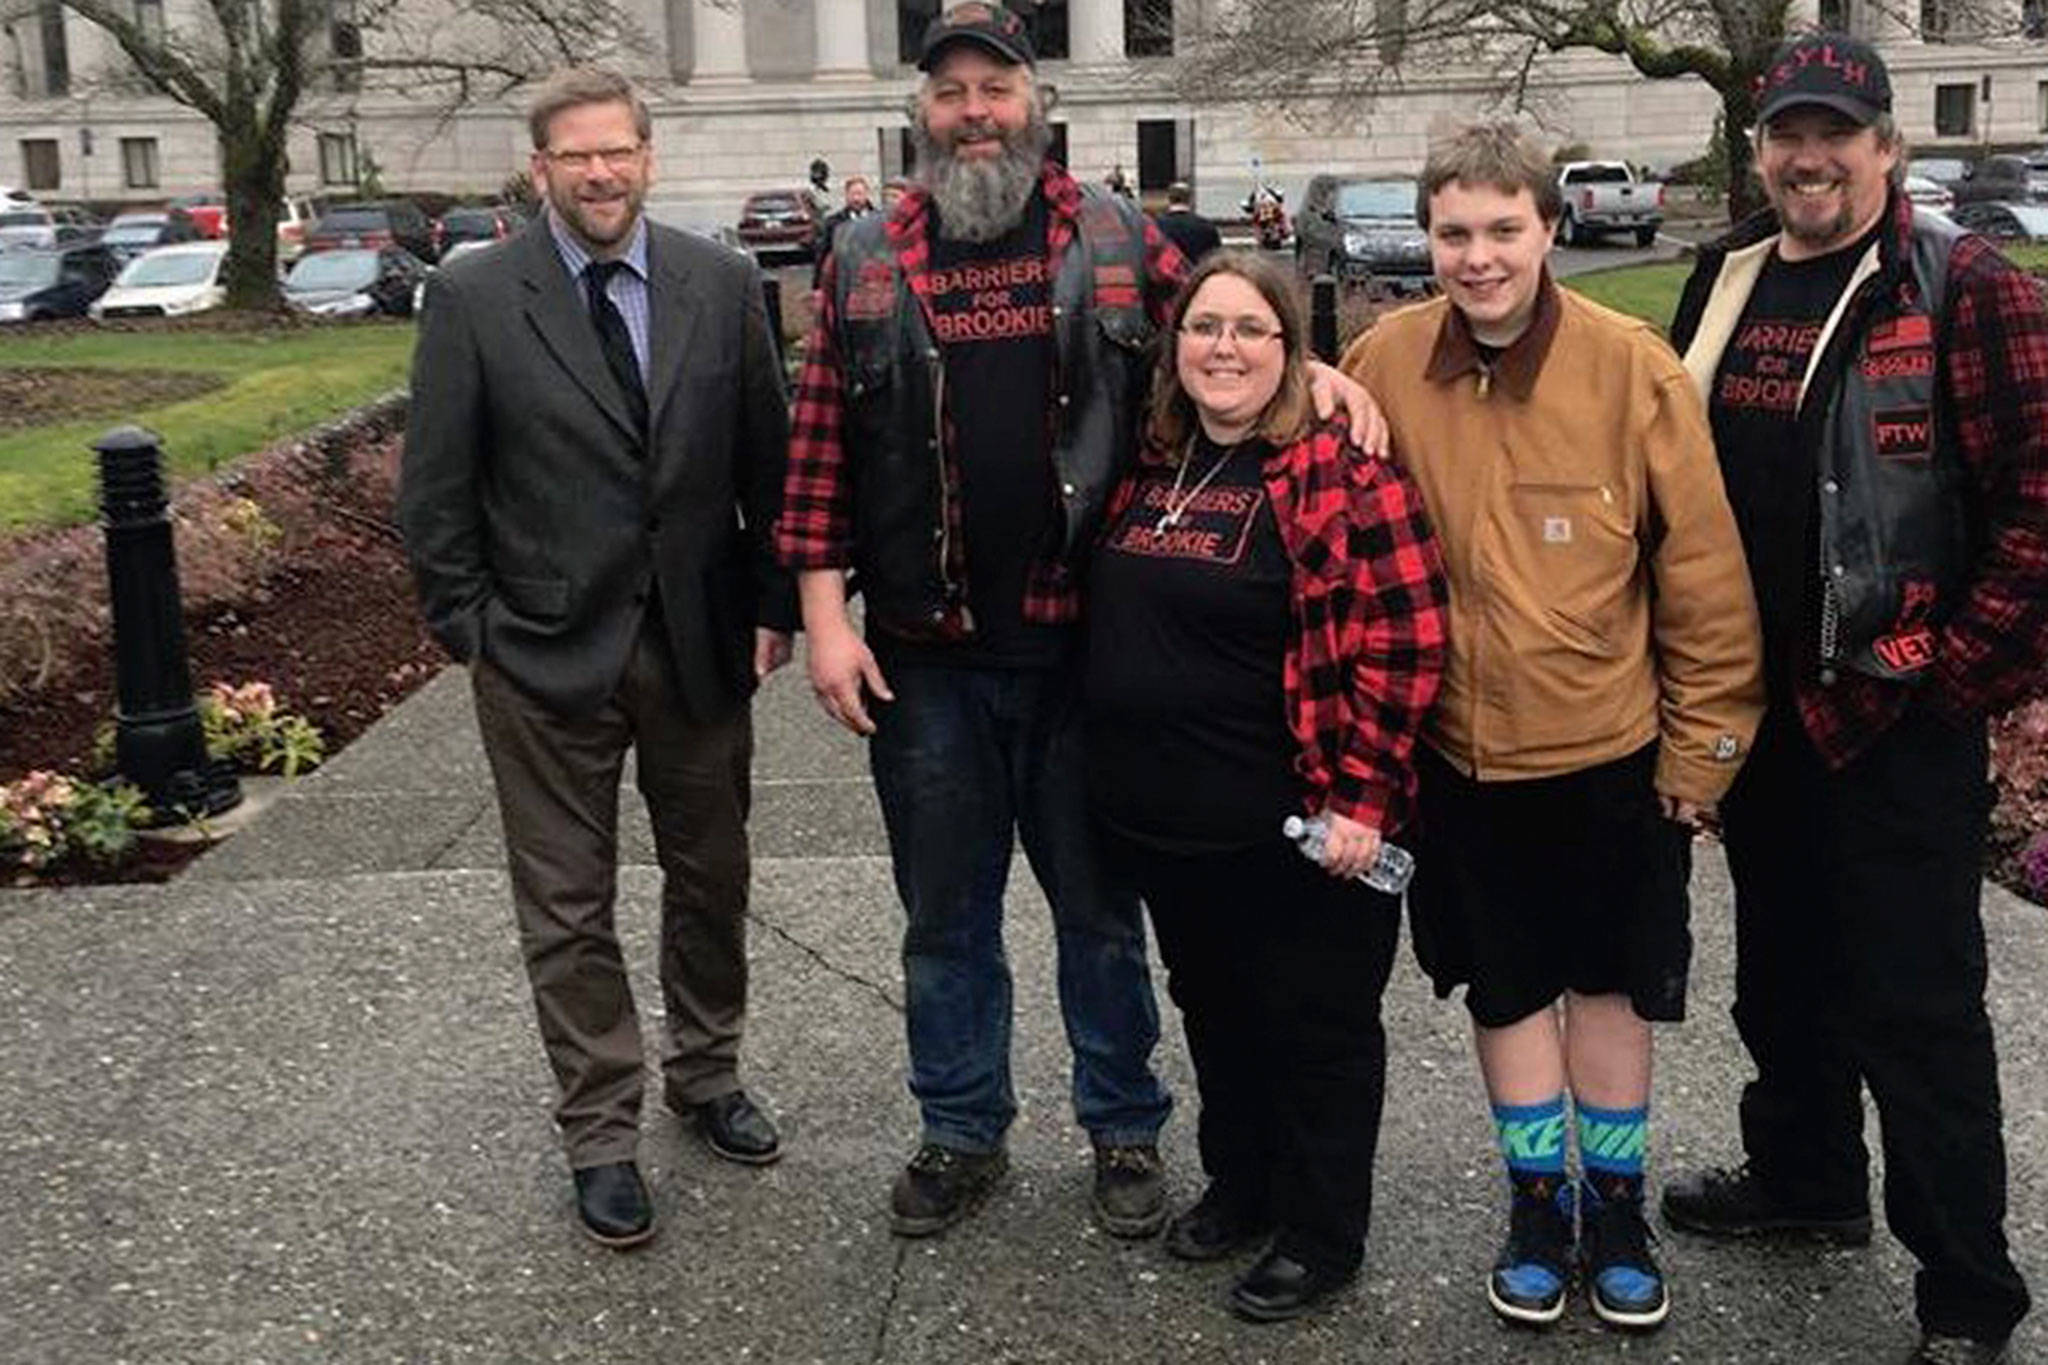 State Rep. Mike Chapman, far left, stands with the Bedinger family, from left, Don Bedinger, Kim Bedinger, Chase Bedinger and James Kirkpatrick in Olympia.